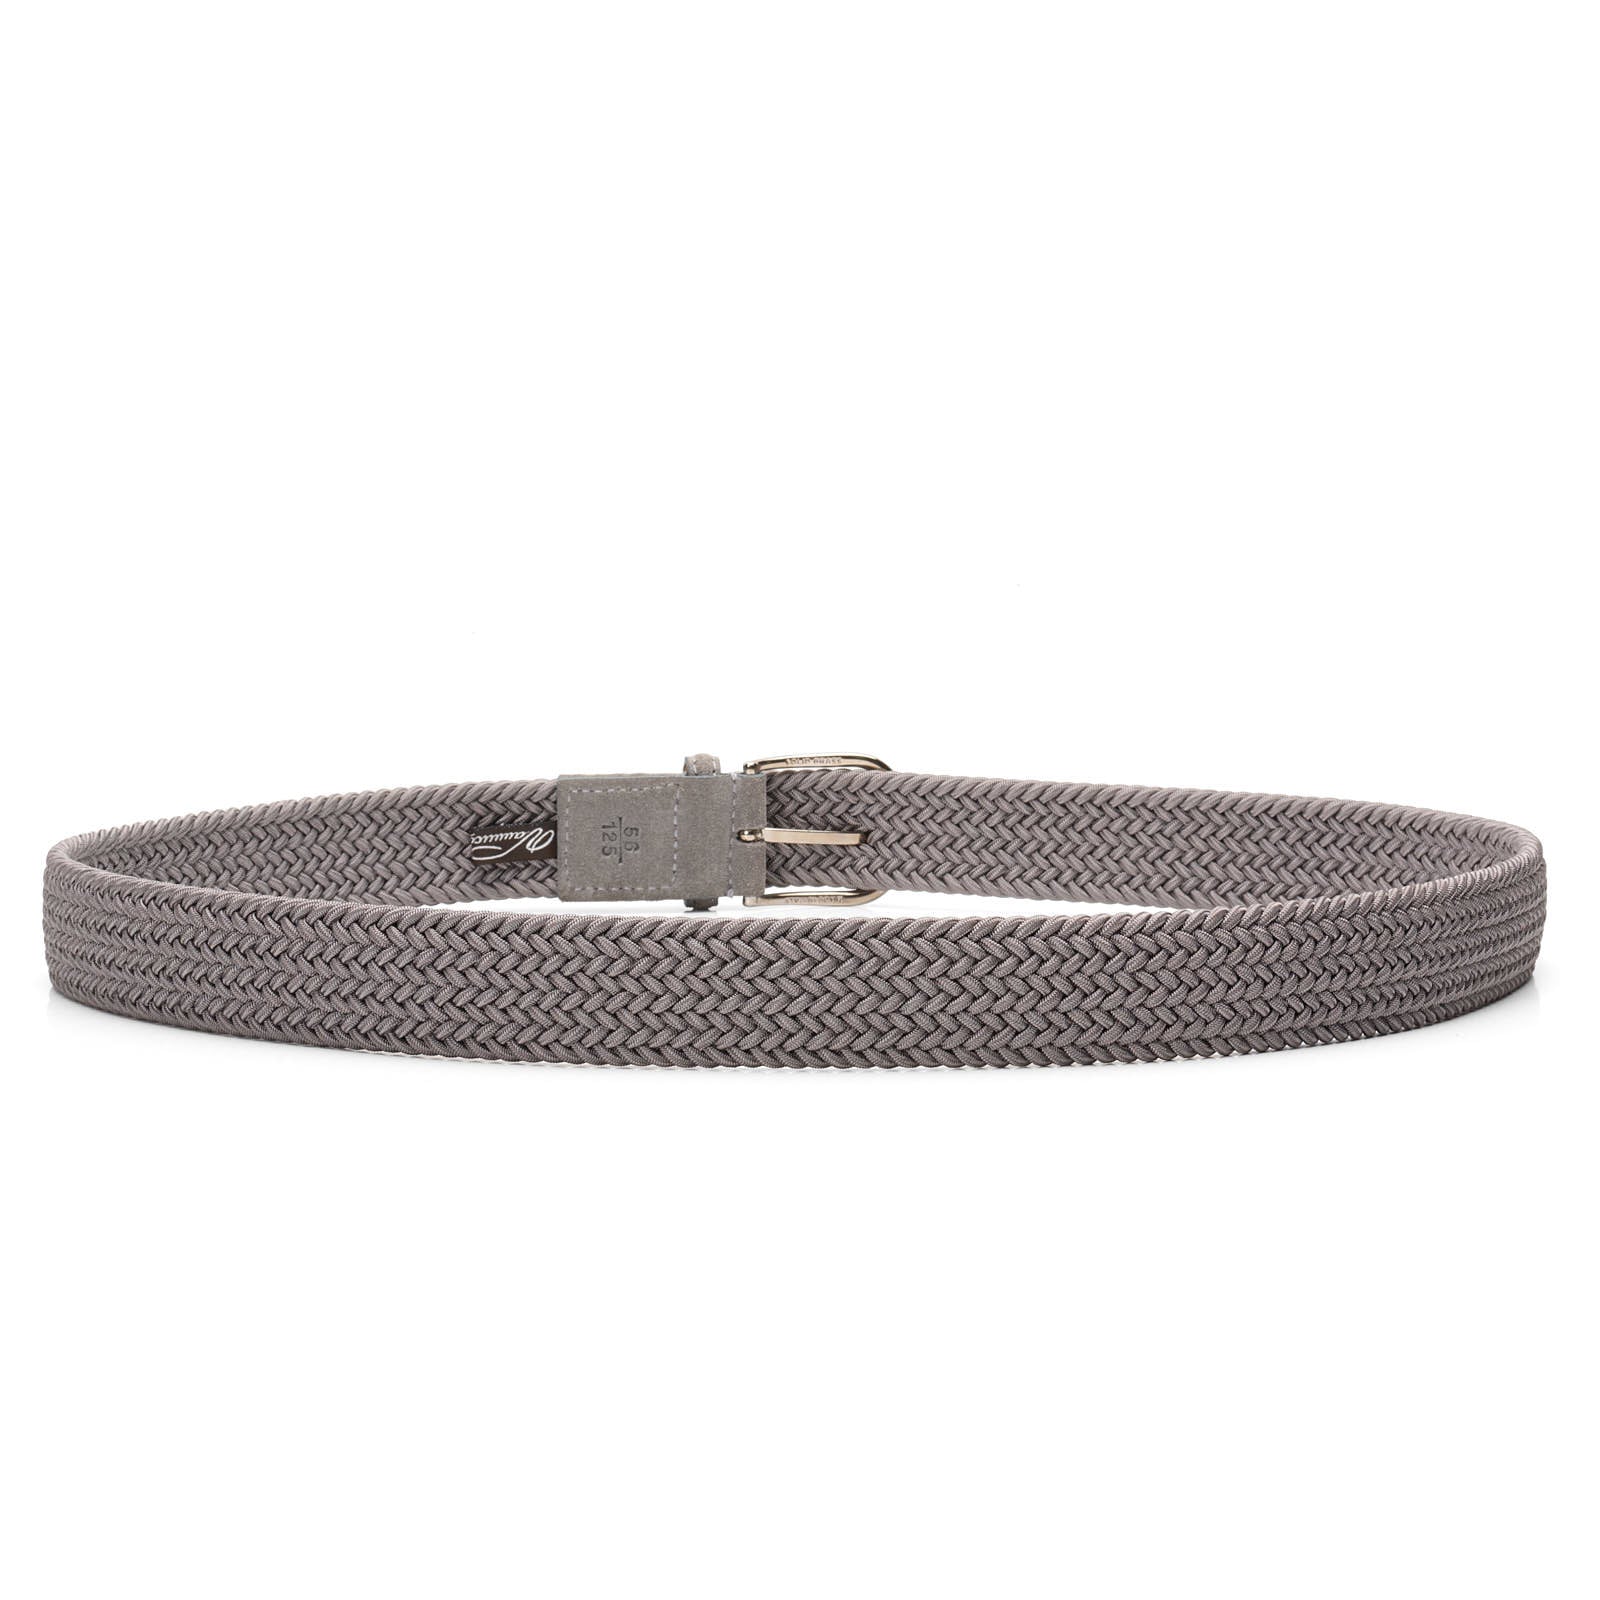 PAOLO VITALE for VANNUCCI Milano Gray Stretch Woven Braided Belt 125cm NEW 50"